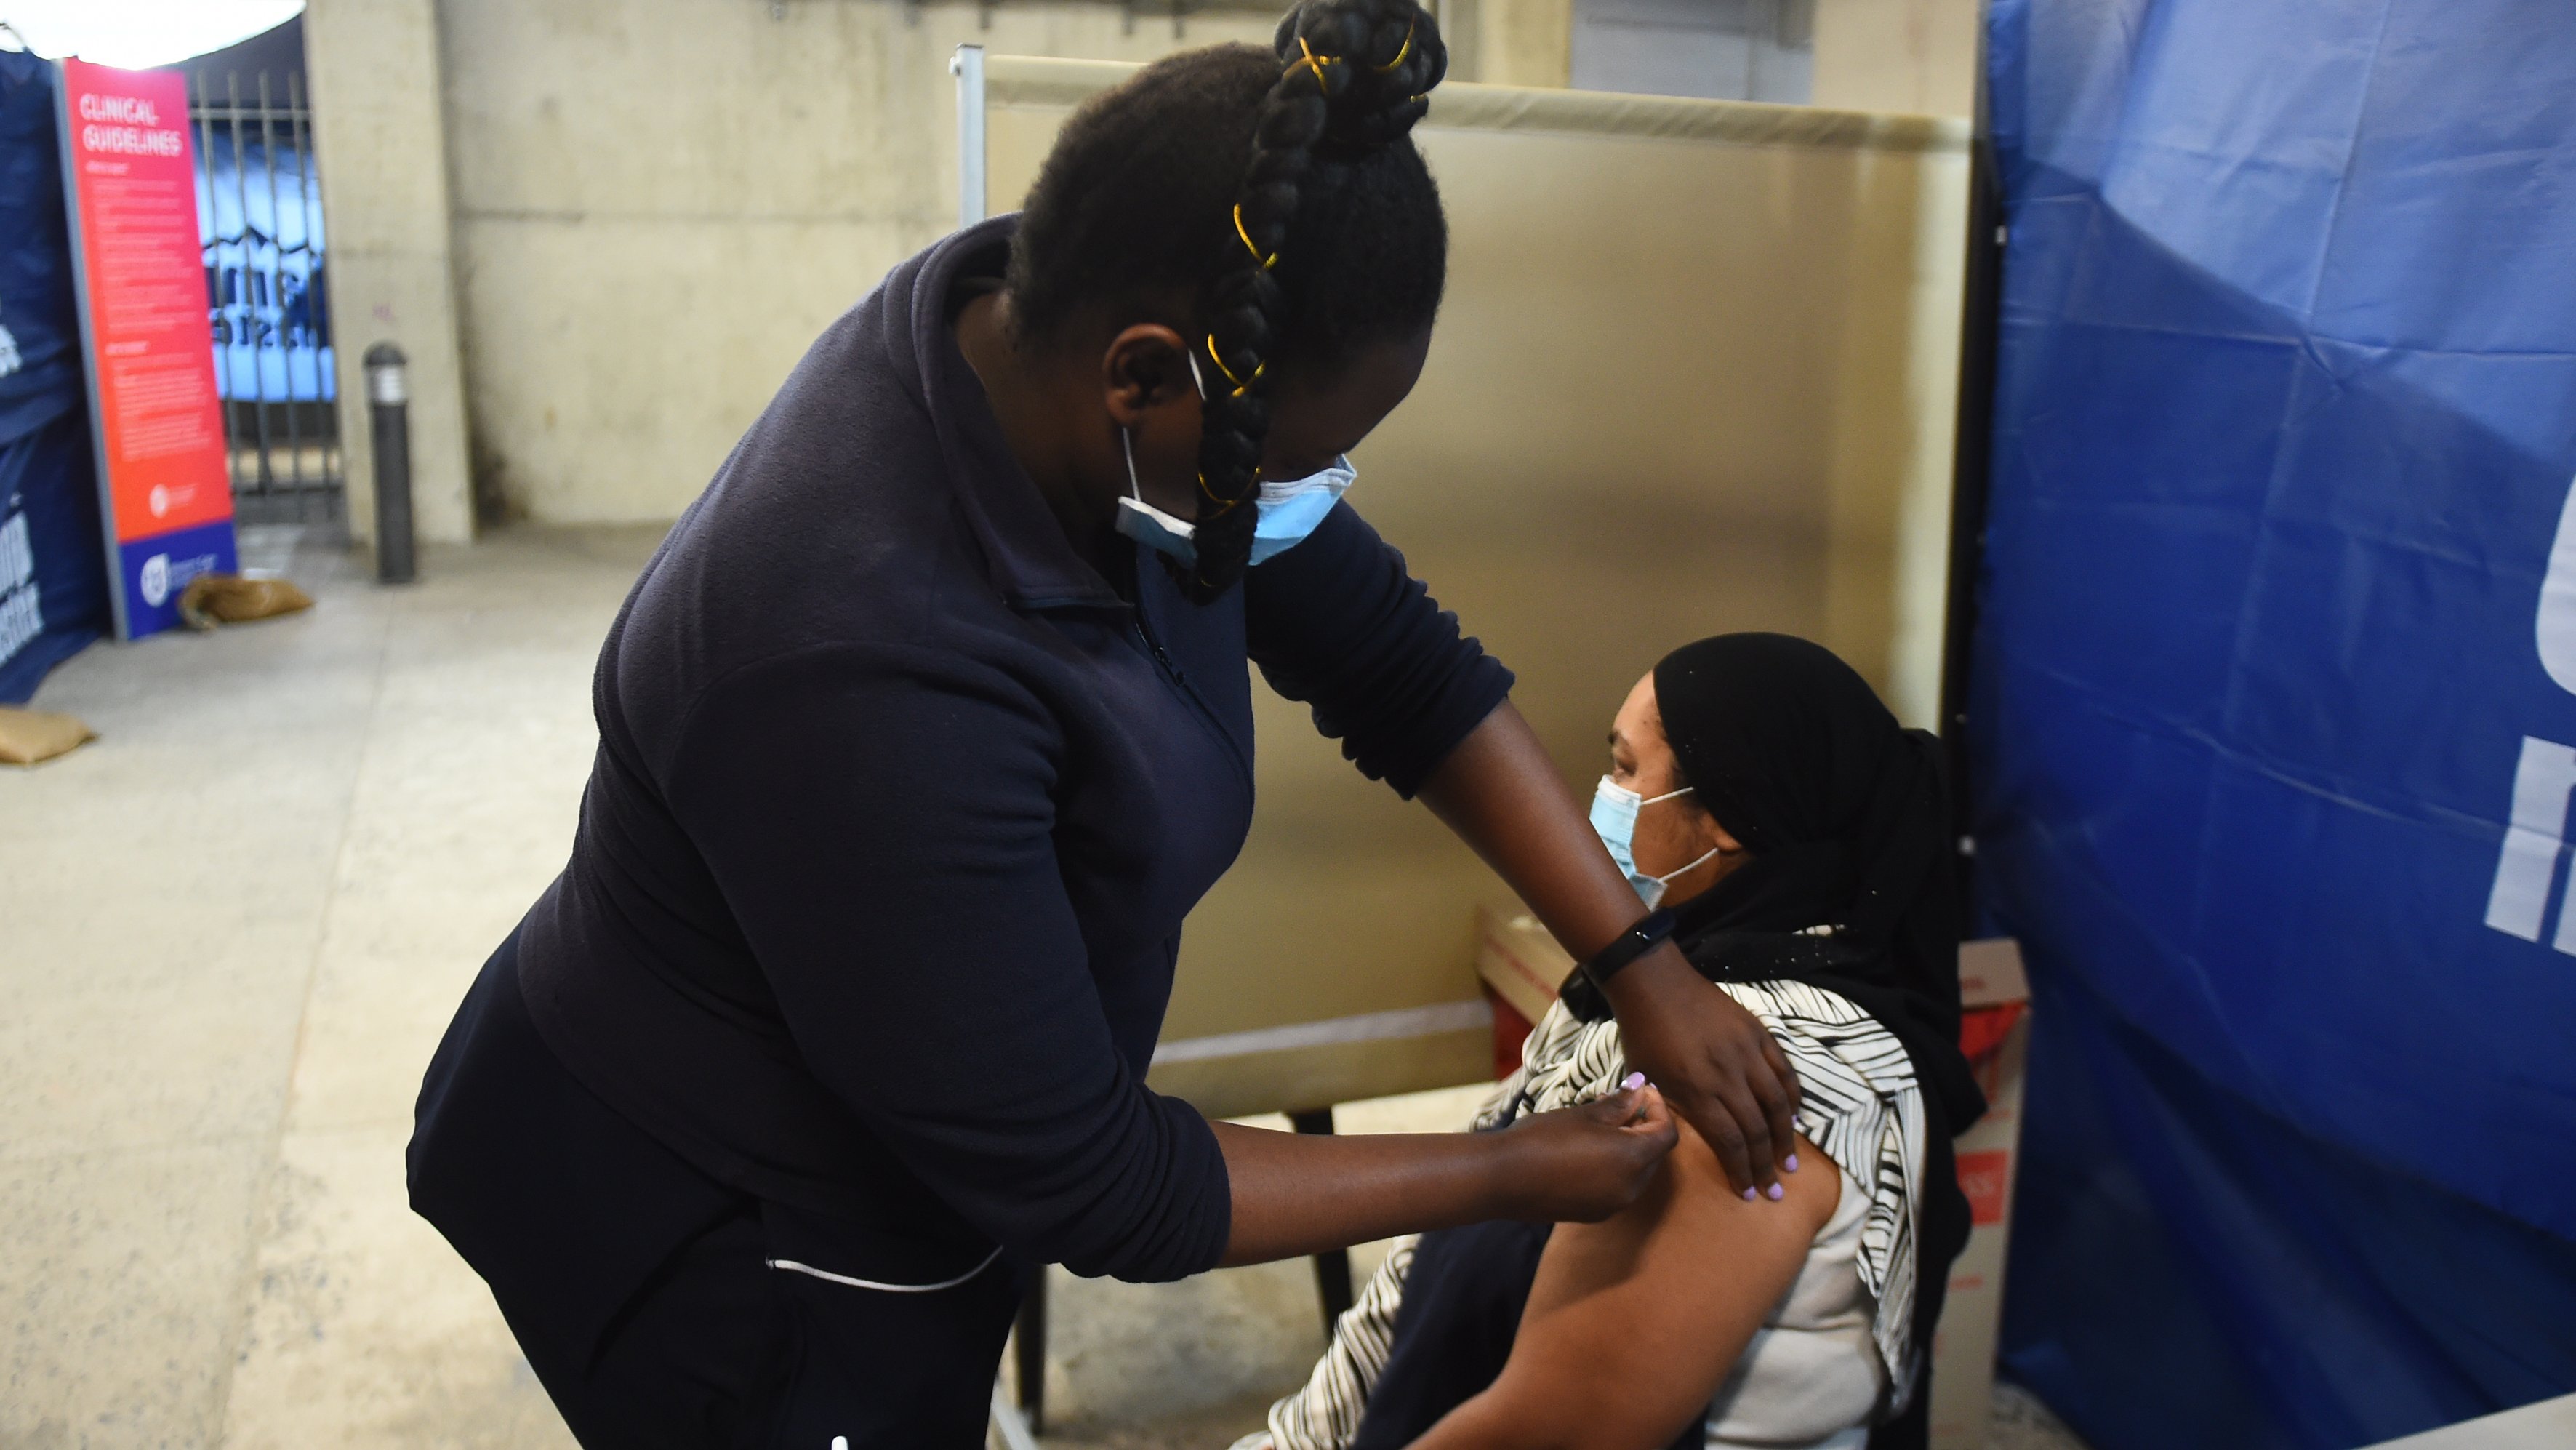 Vaccination centers in South Africa continue administering Covid-19 vaccines